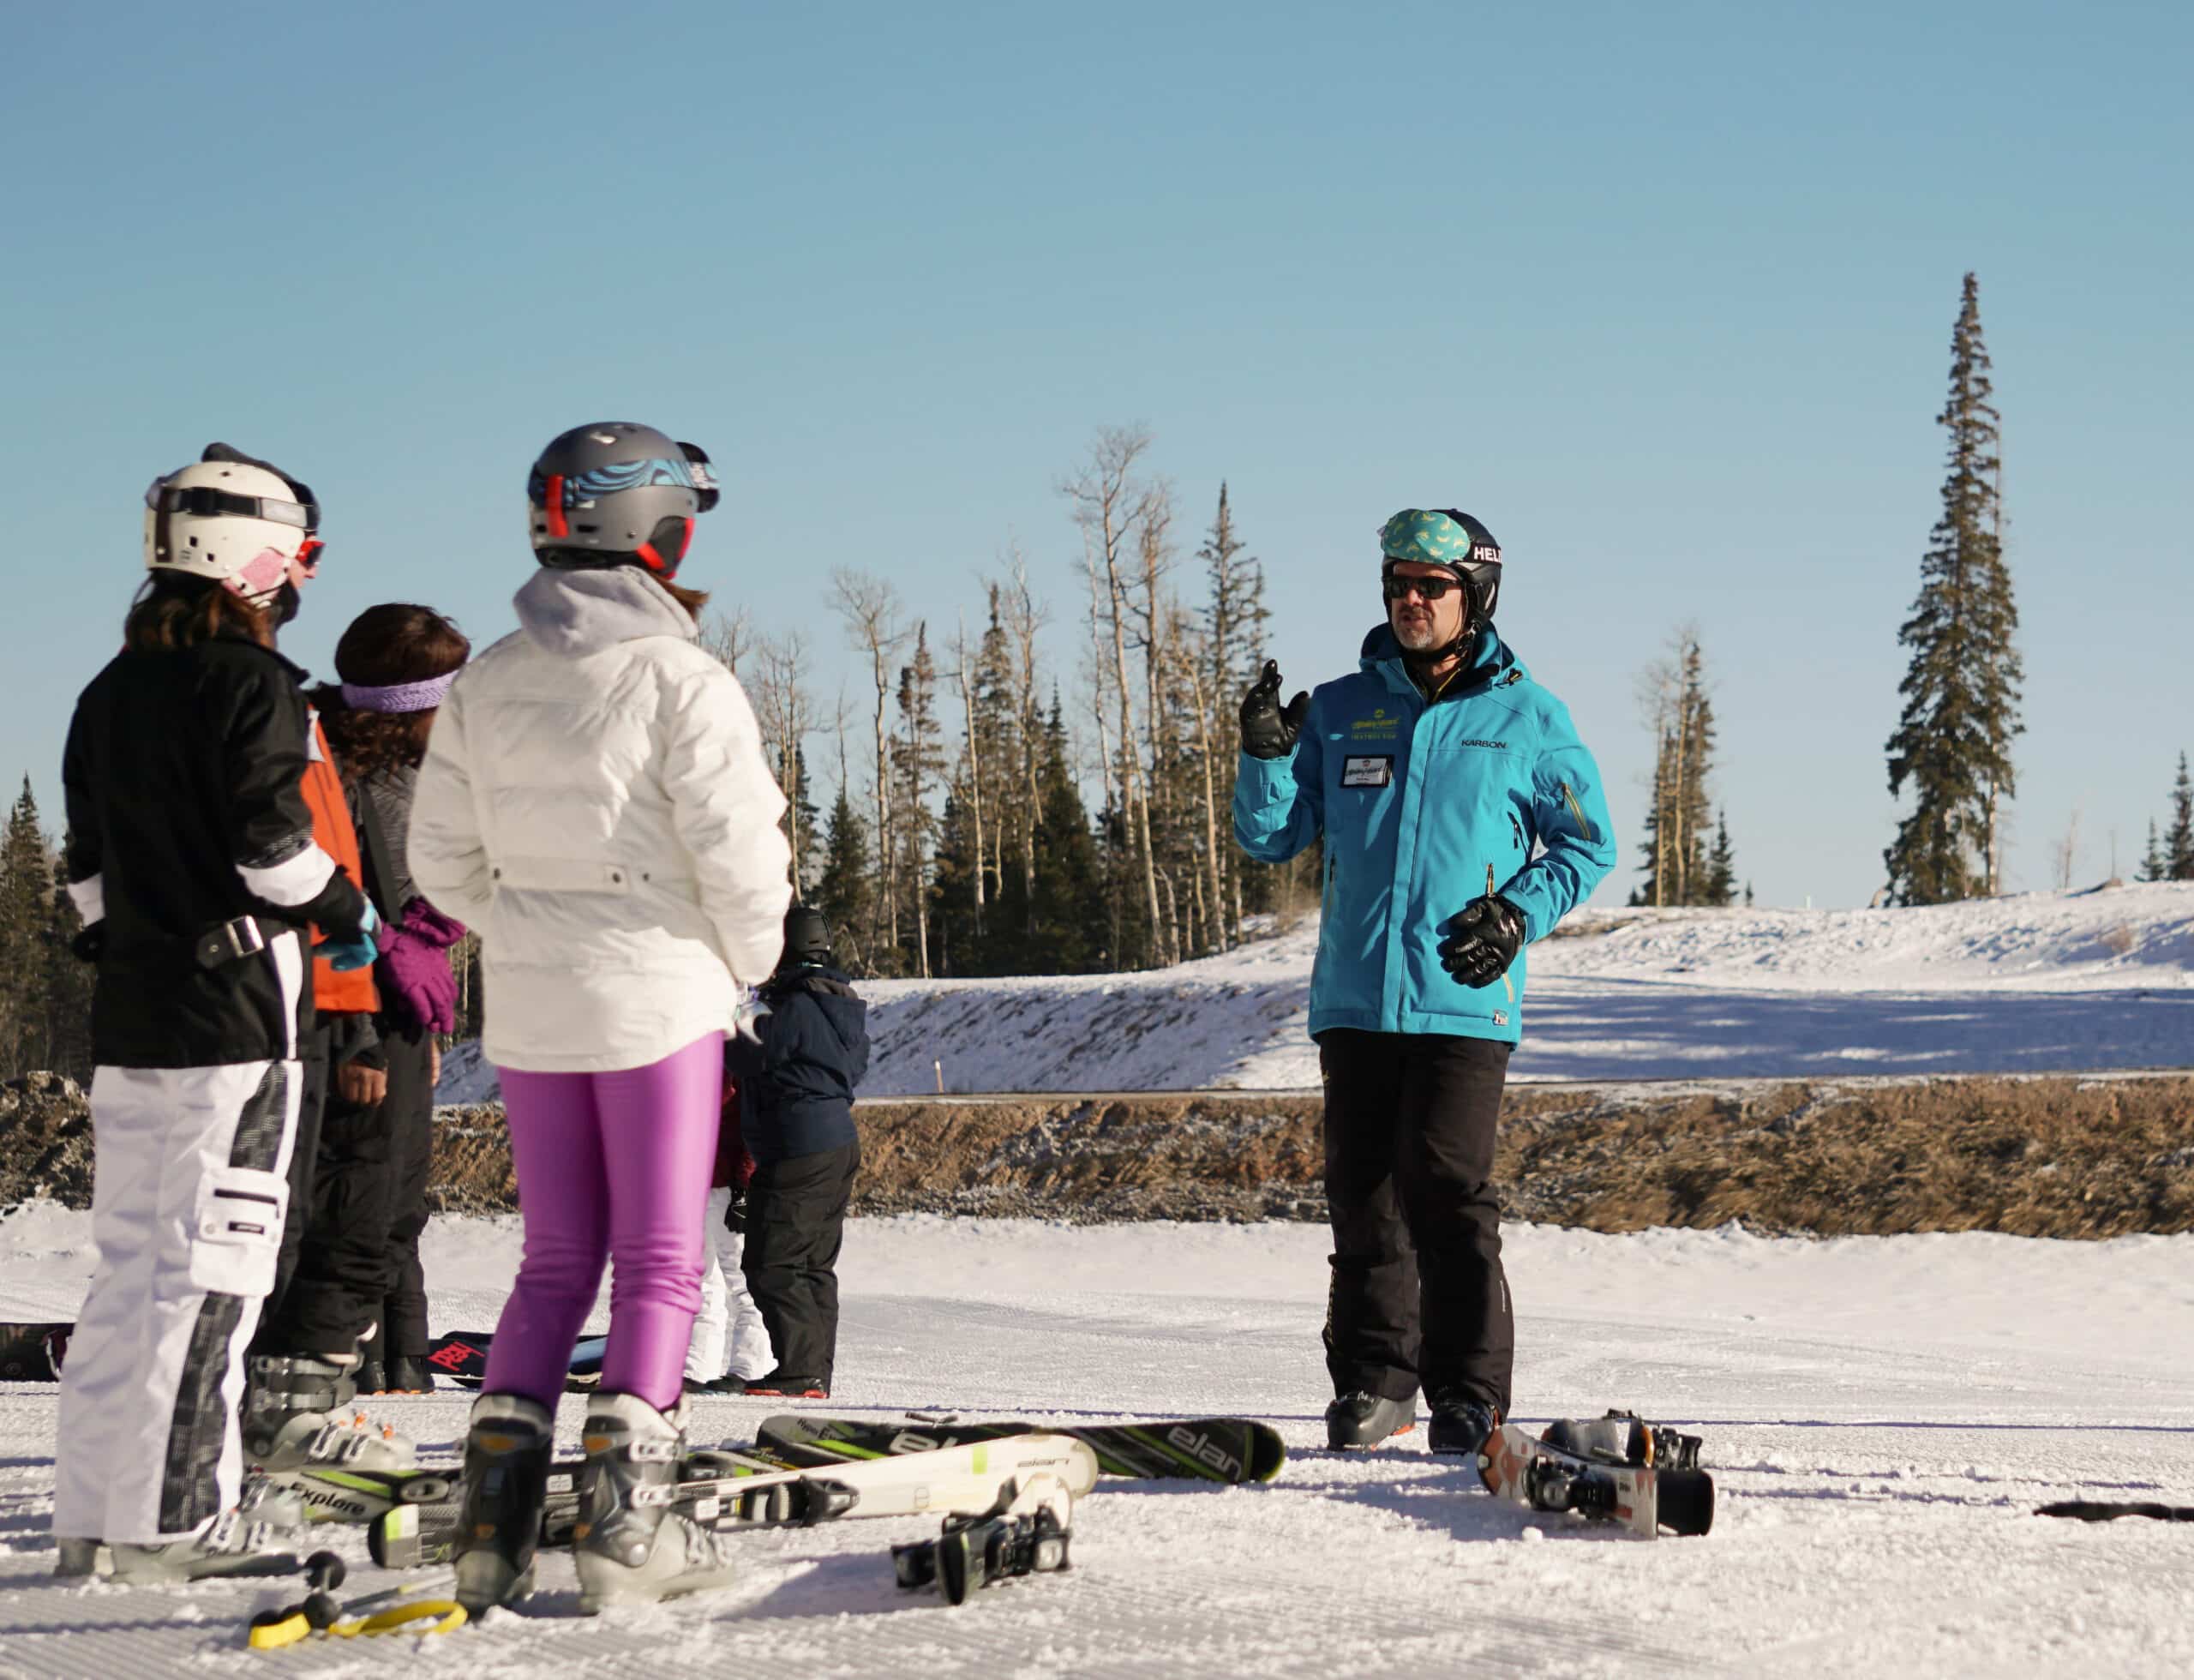 Adult Group Lessons at brian head resort